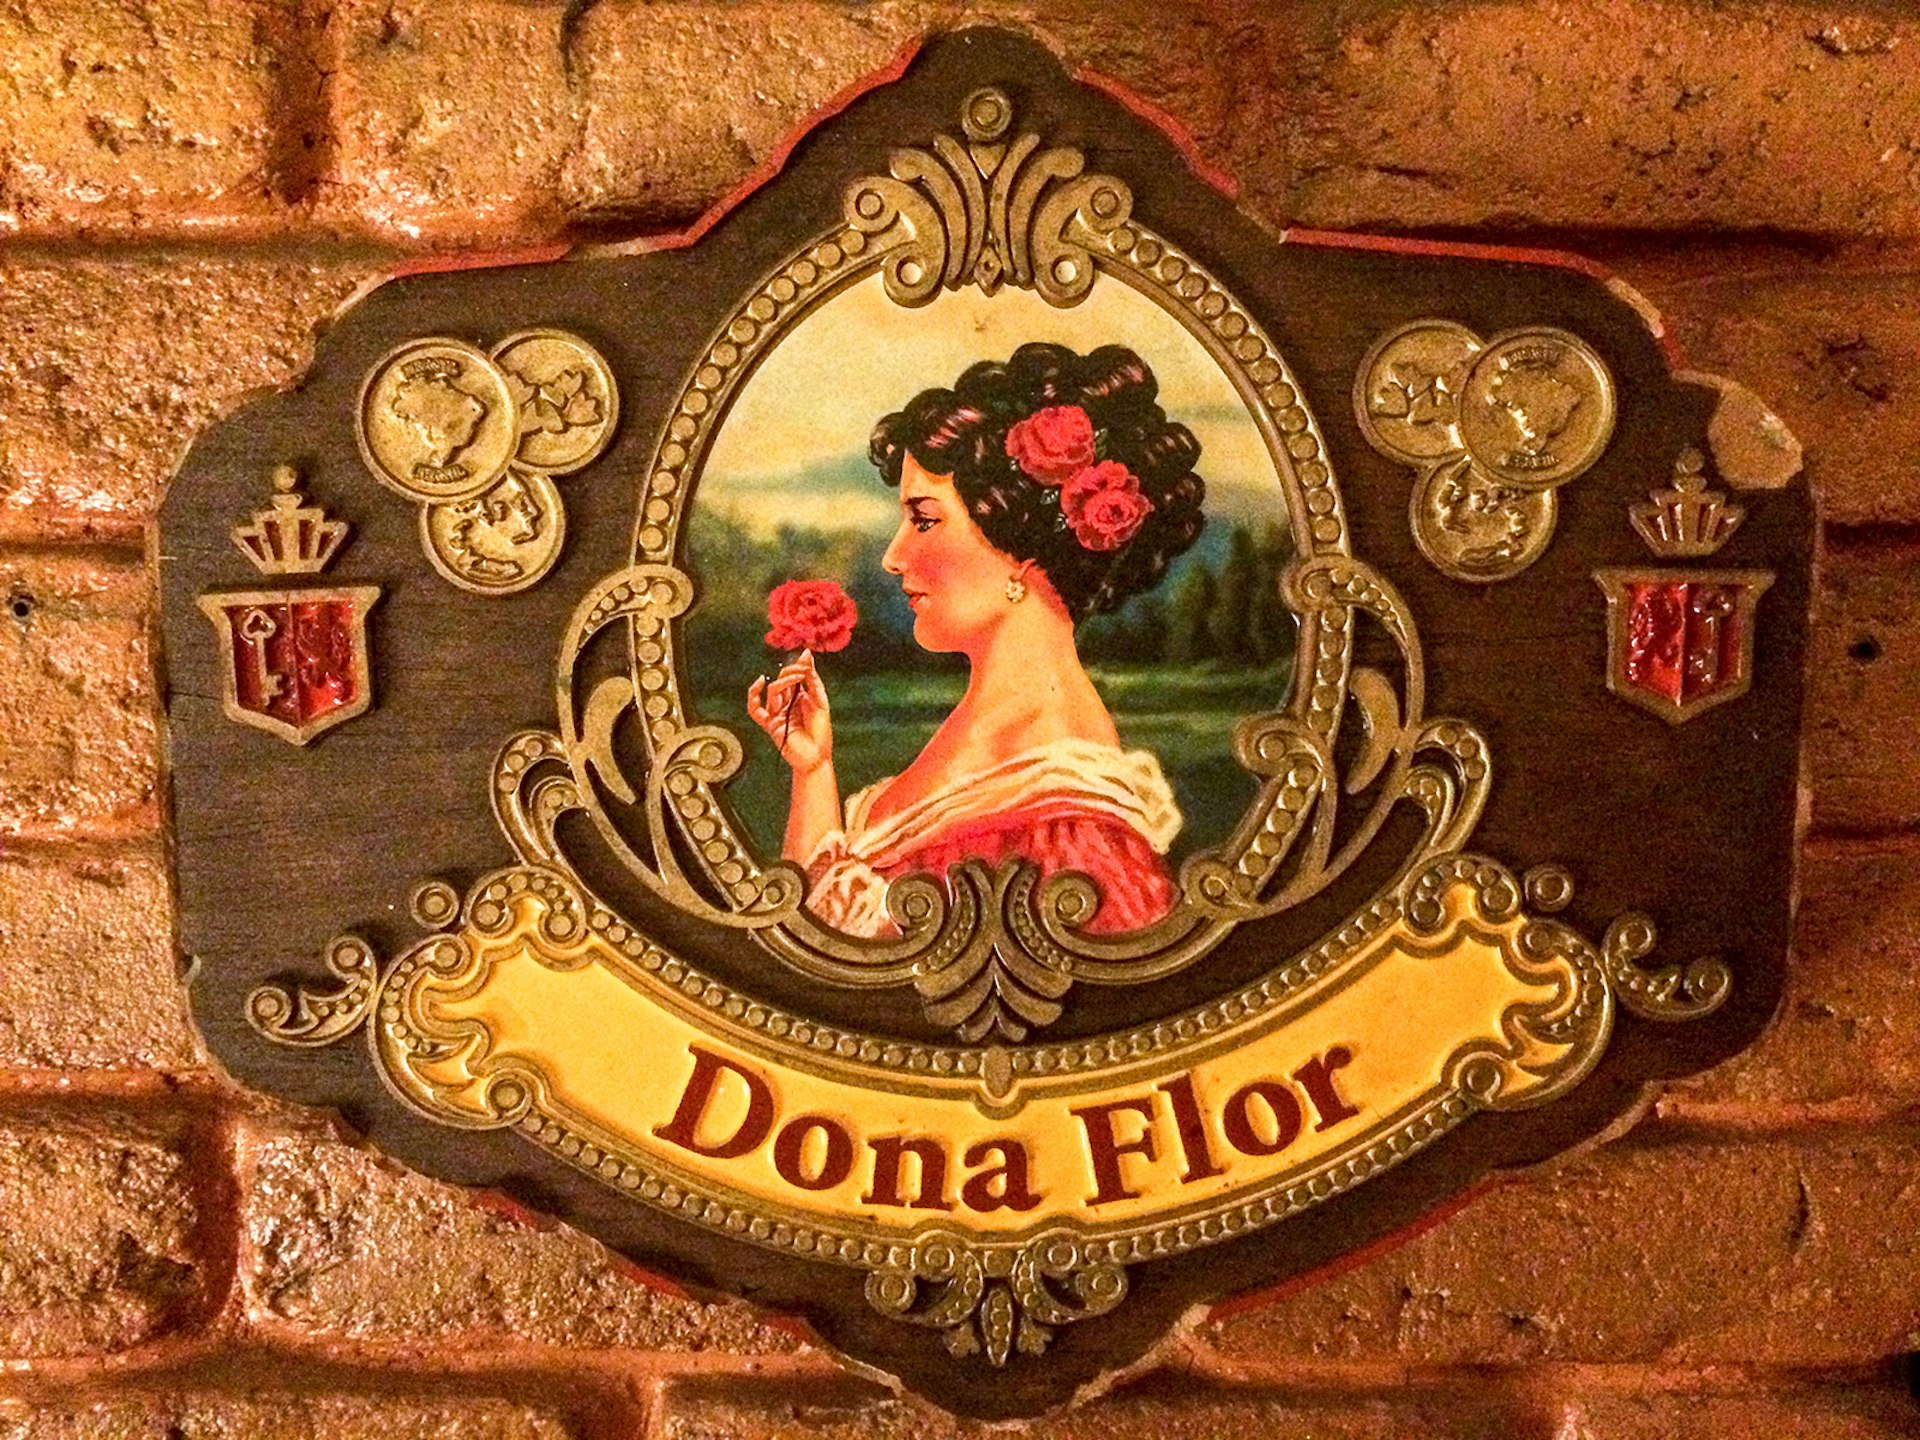 A close-up of a plaque with a painting of a woman with dark hair smelling a pink rose and wearing a pink dress, with "Dona Flor" written below it